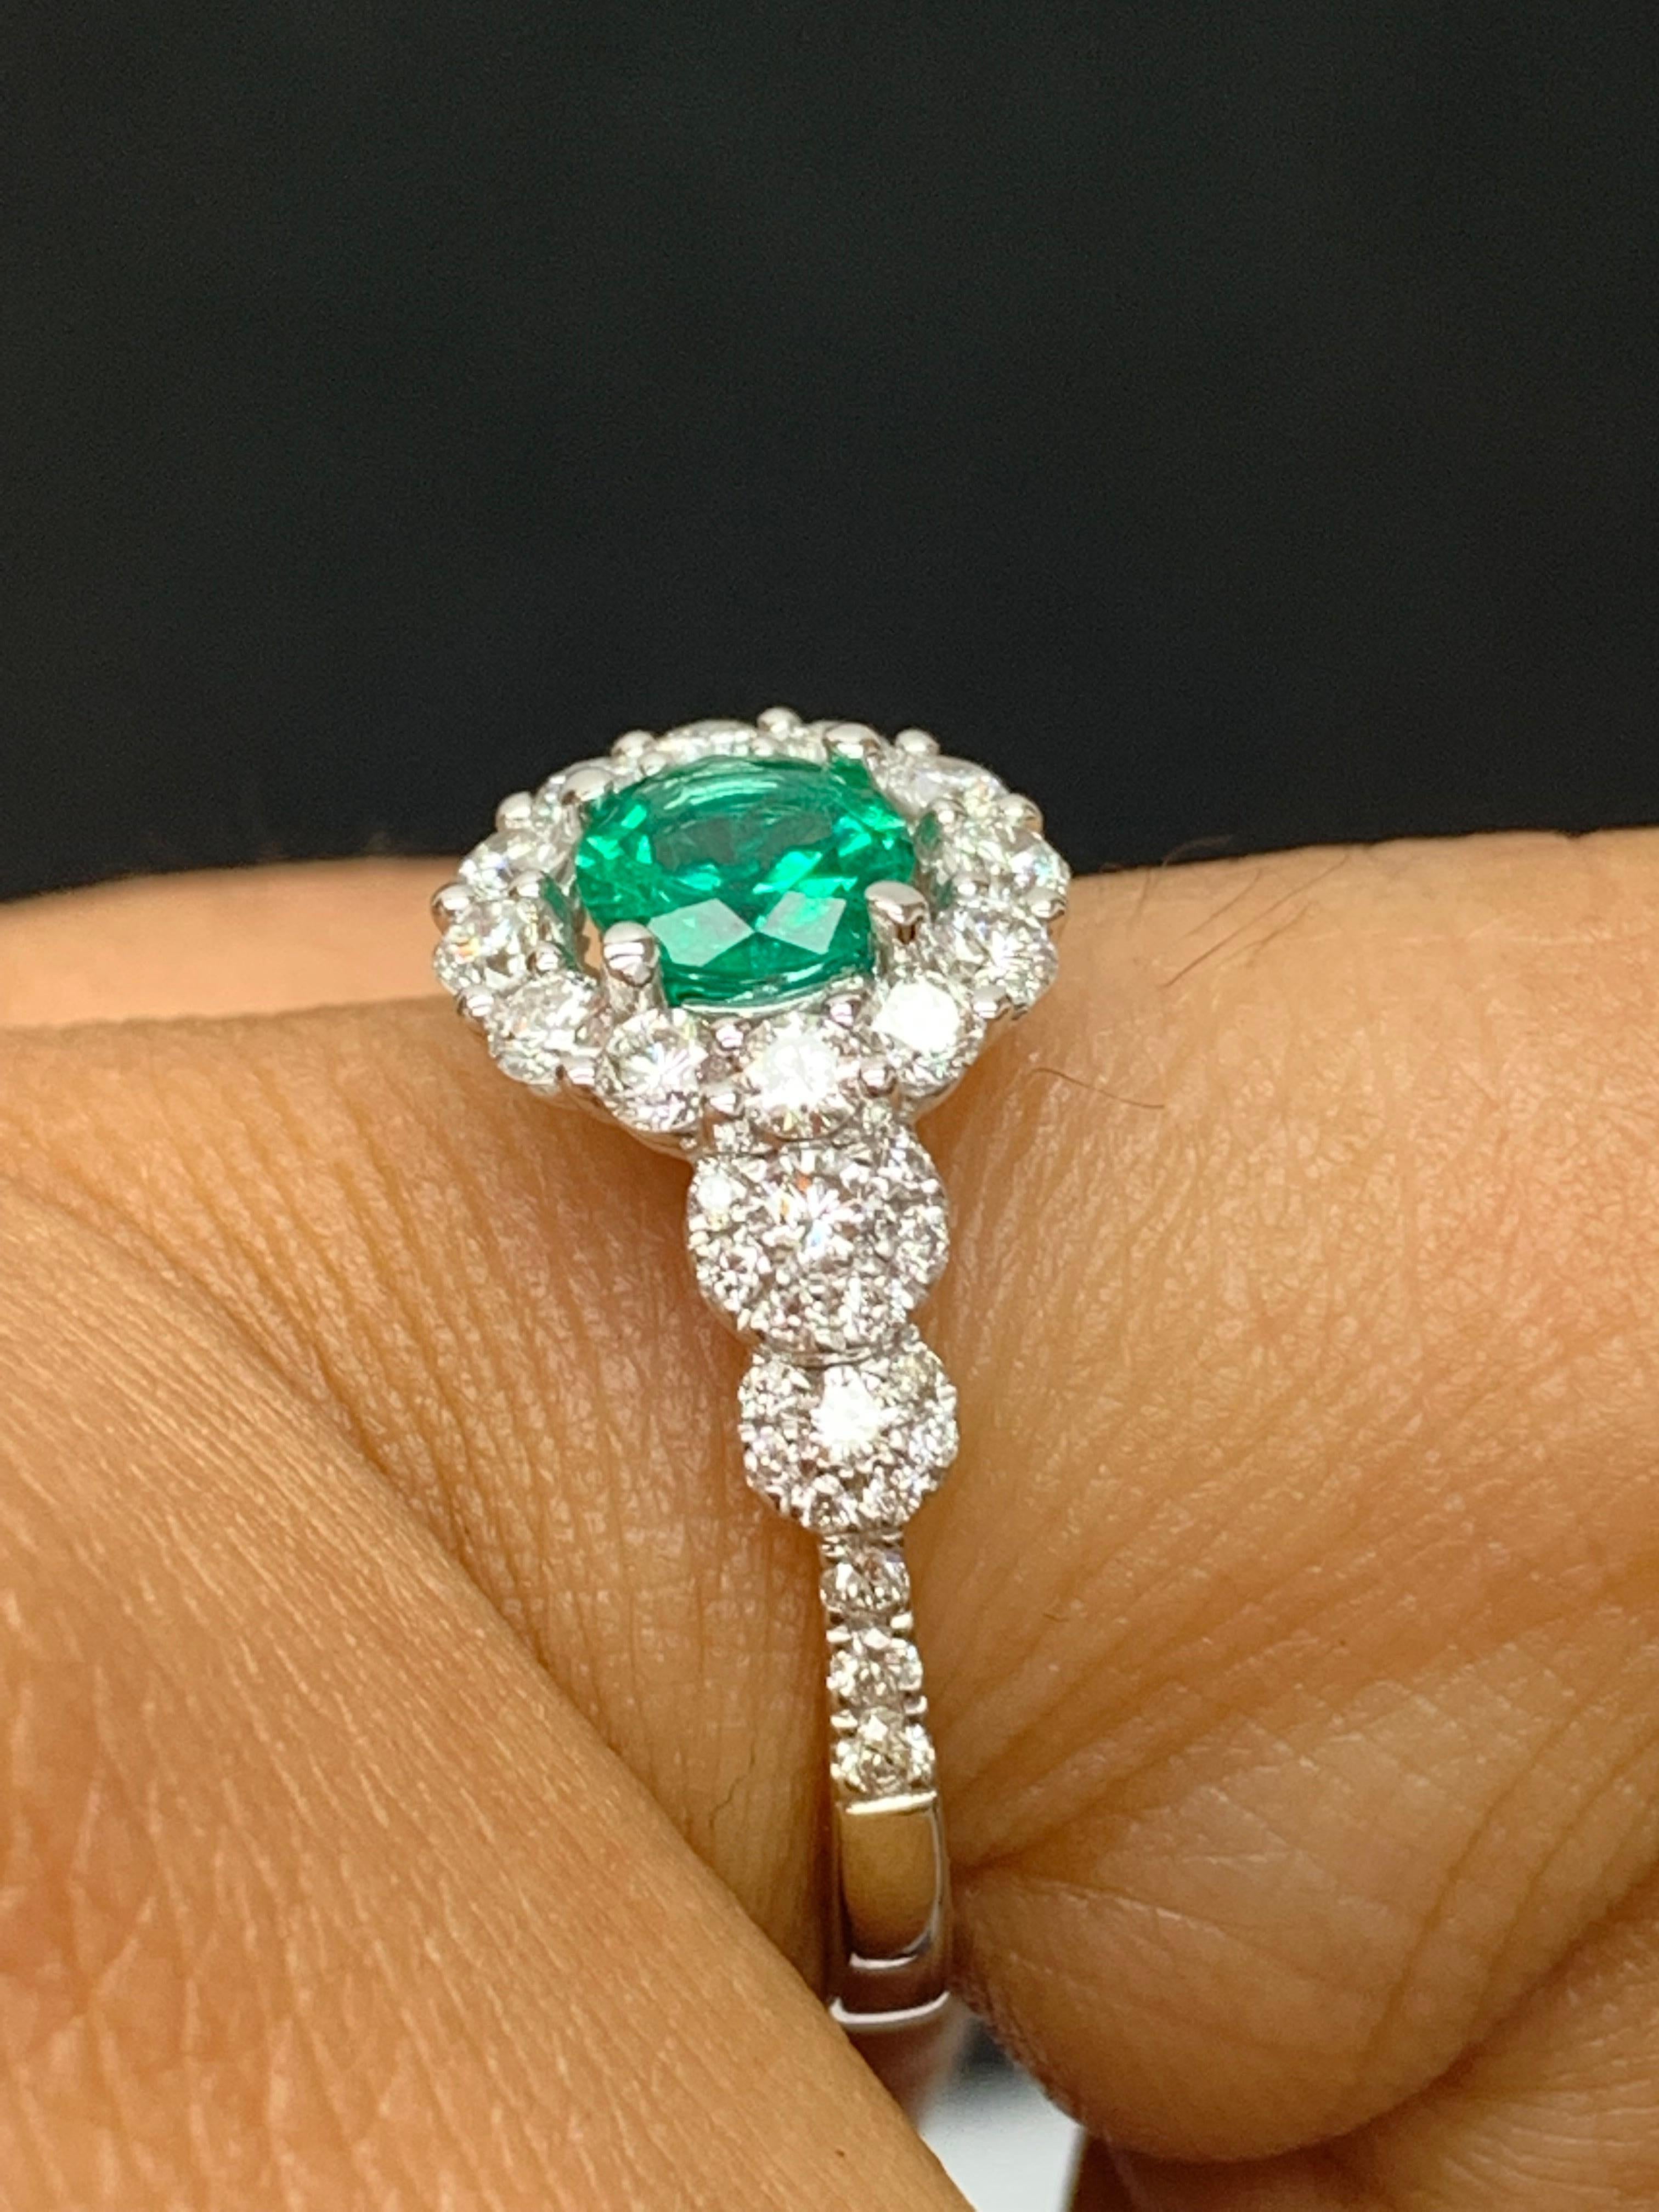 0.62 Carat Round Cut Emerald and Diamond Fashion Ring in 18k White Gold For Sale 1